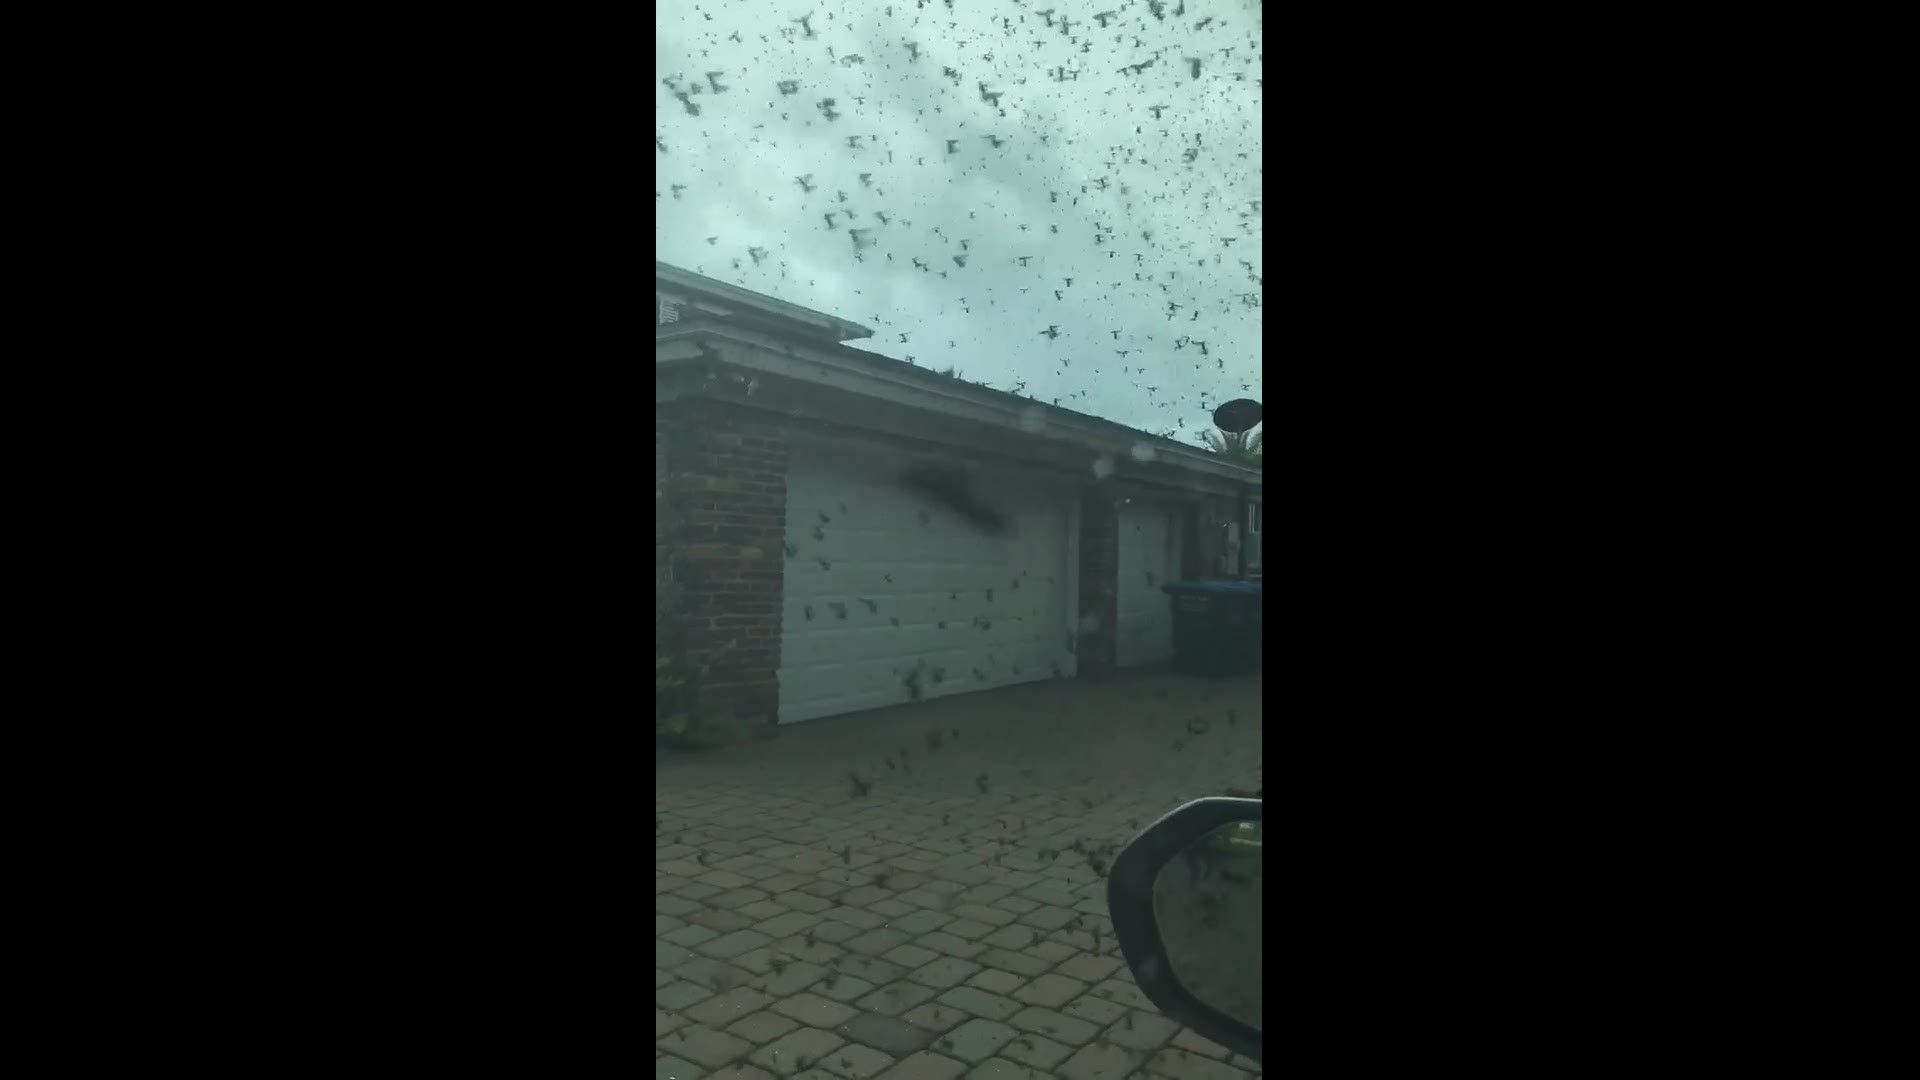 Terry Cronin took this video of a swarm of lovebugs filling the air.